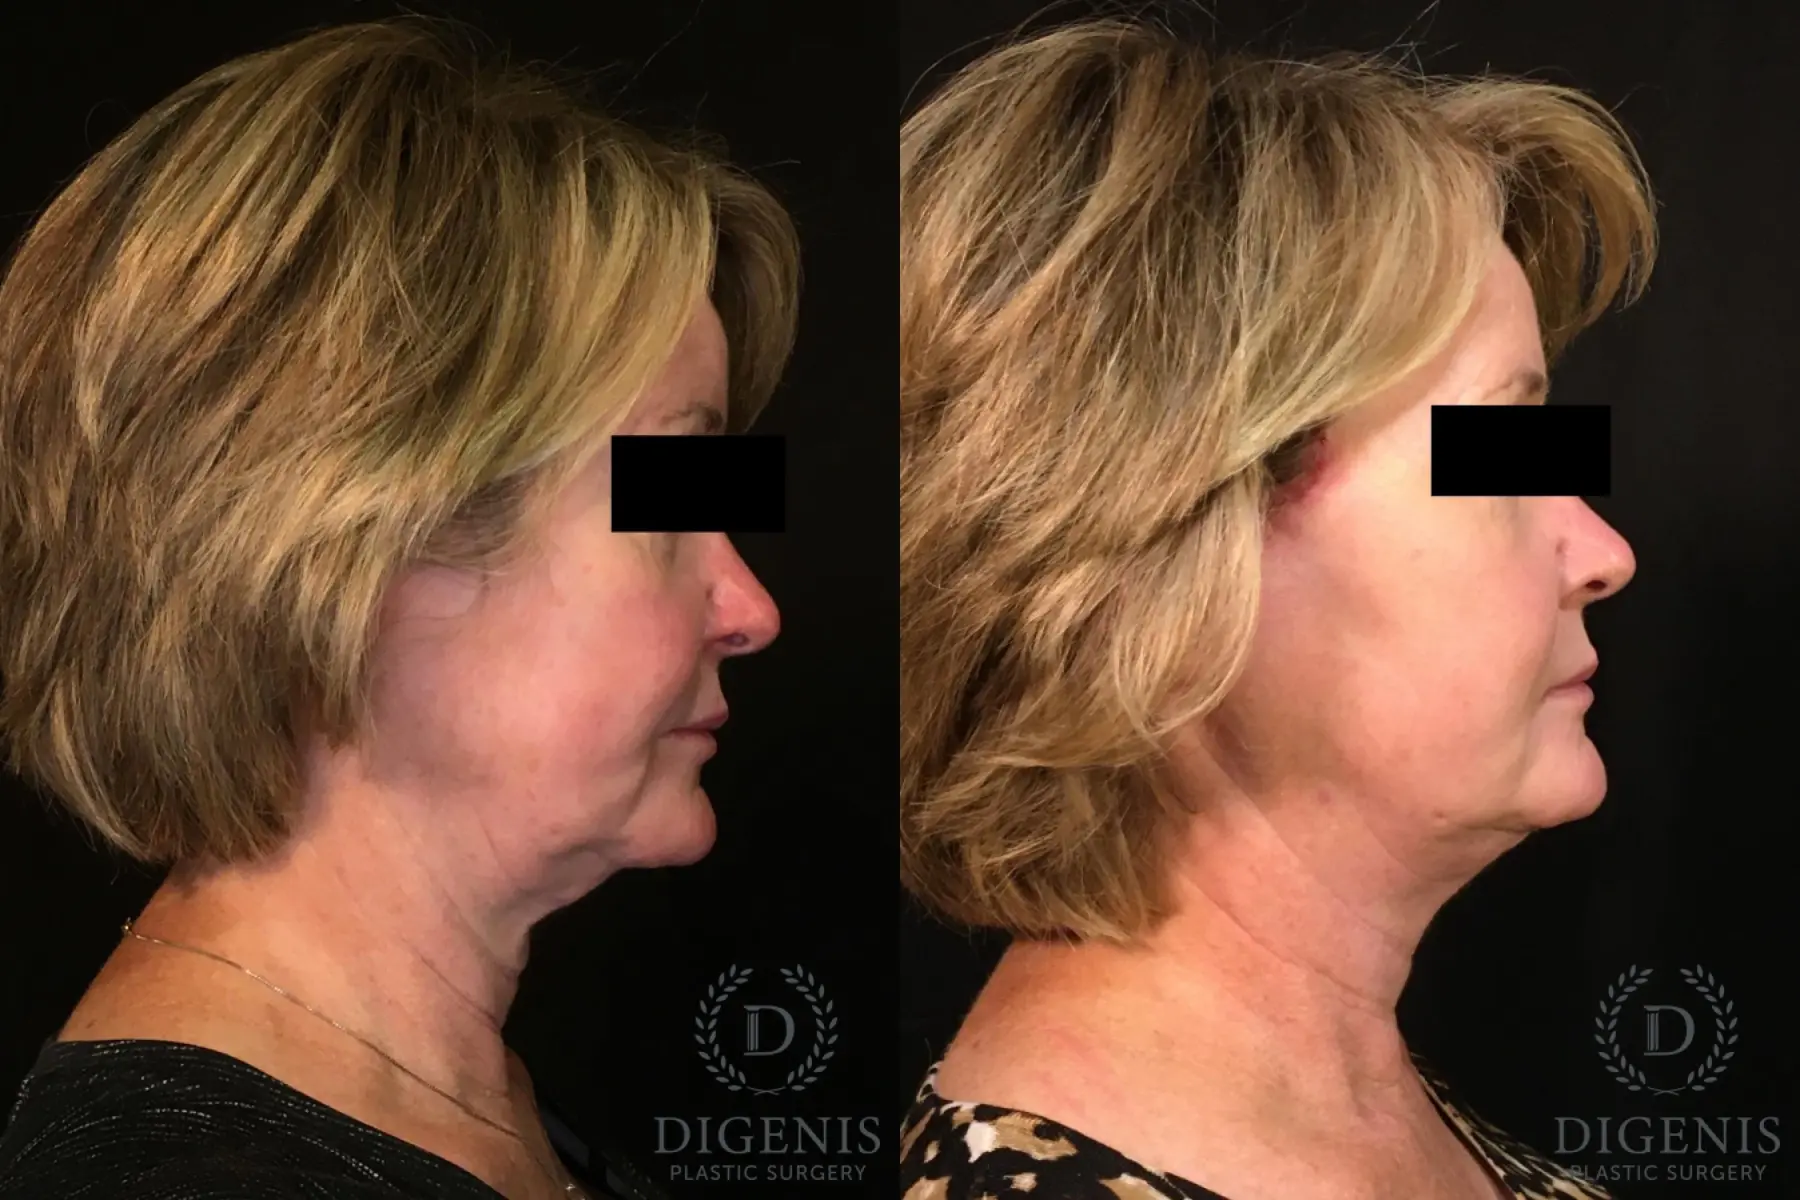 Digenis Refresh Lift: Patient 1 - Before and After 3